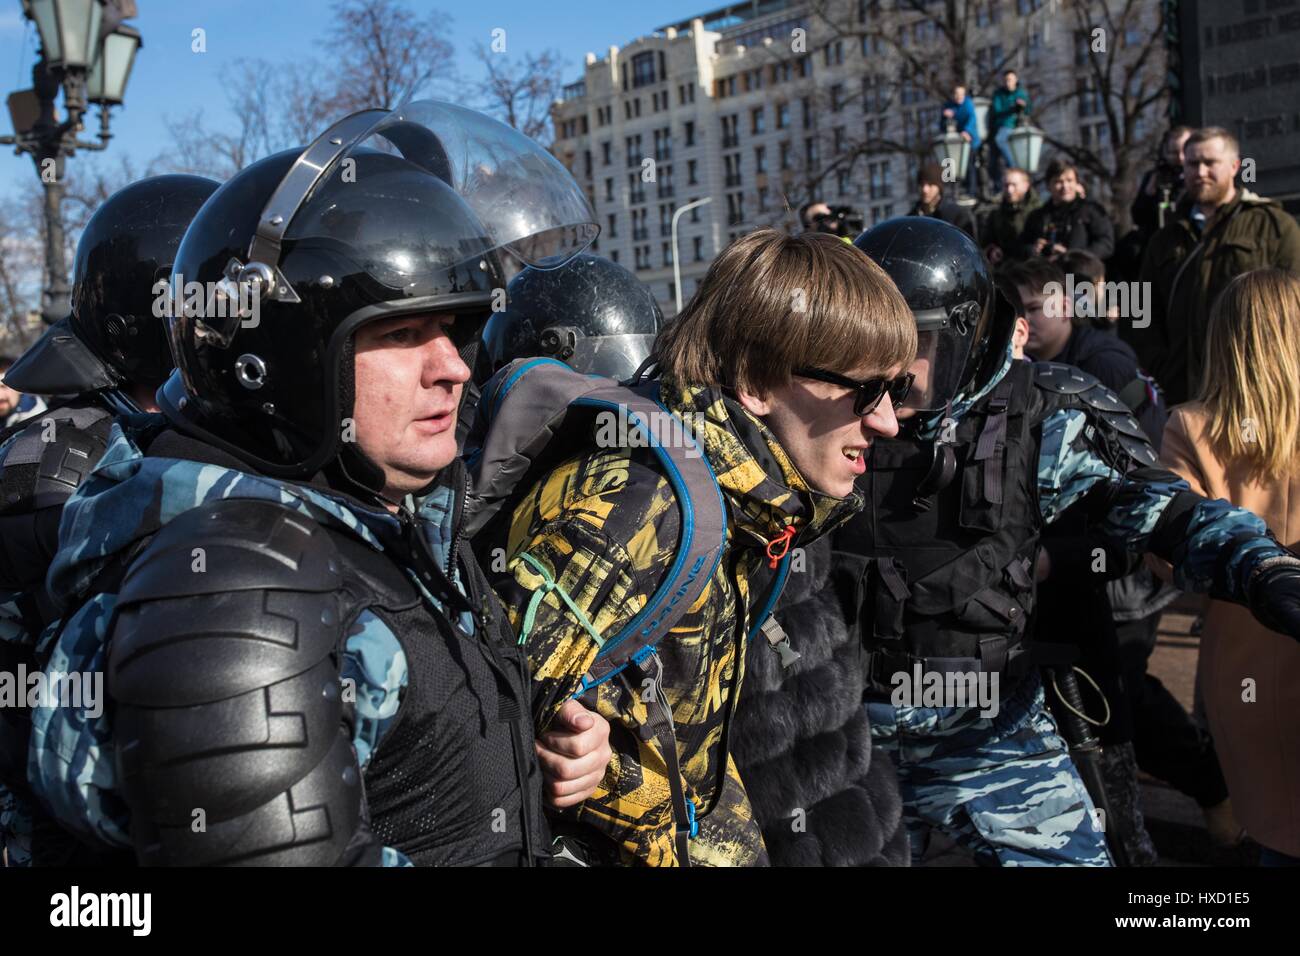 Moscow, Russia. 26th Mar, 2017. Police arrests a man during an anti-corruption protest in Moscow, Russia, on March 26, 2017. Russian law enforcement agencies acted properly during Sunday's 'unauthorized' protest, during which hundreds of participants were detained, the Kremlin said Monday. Official data showed that about 7,000-8,000 people took to the street in downtown Moscow on Sunday in a protest against corruption. Police detained some 500 people during the demonstration. Credit: Wu Zhuang/Xinhua/Alamy Live News Stock Photo